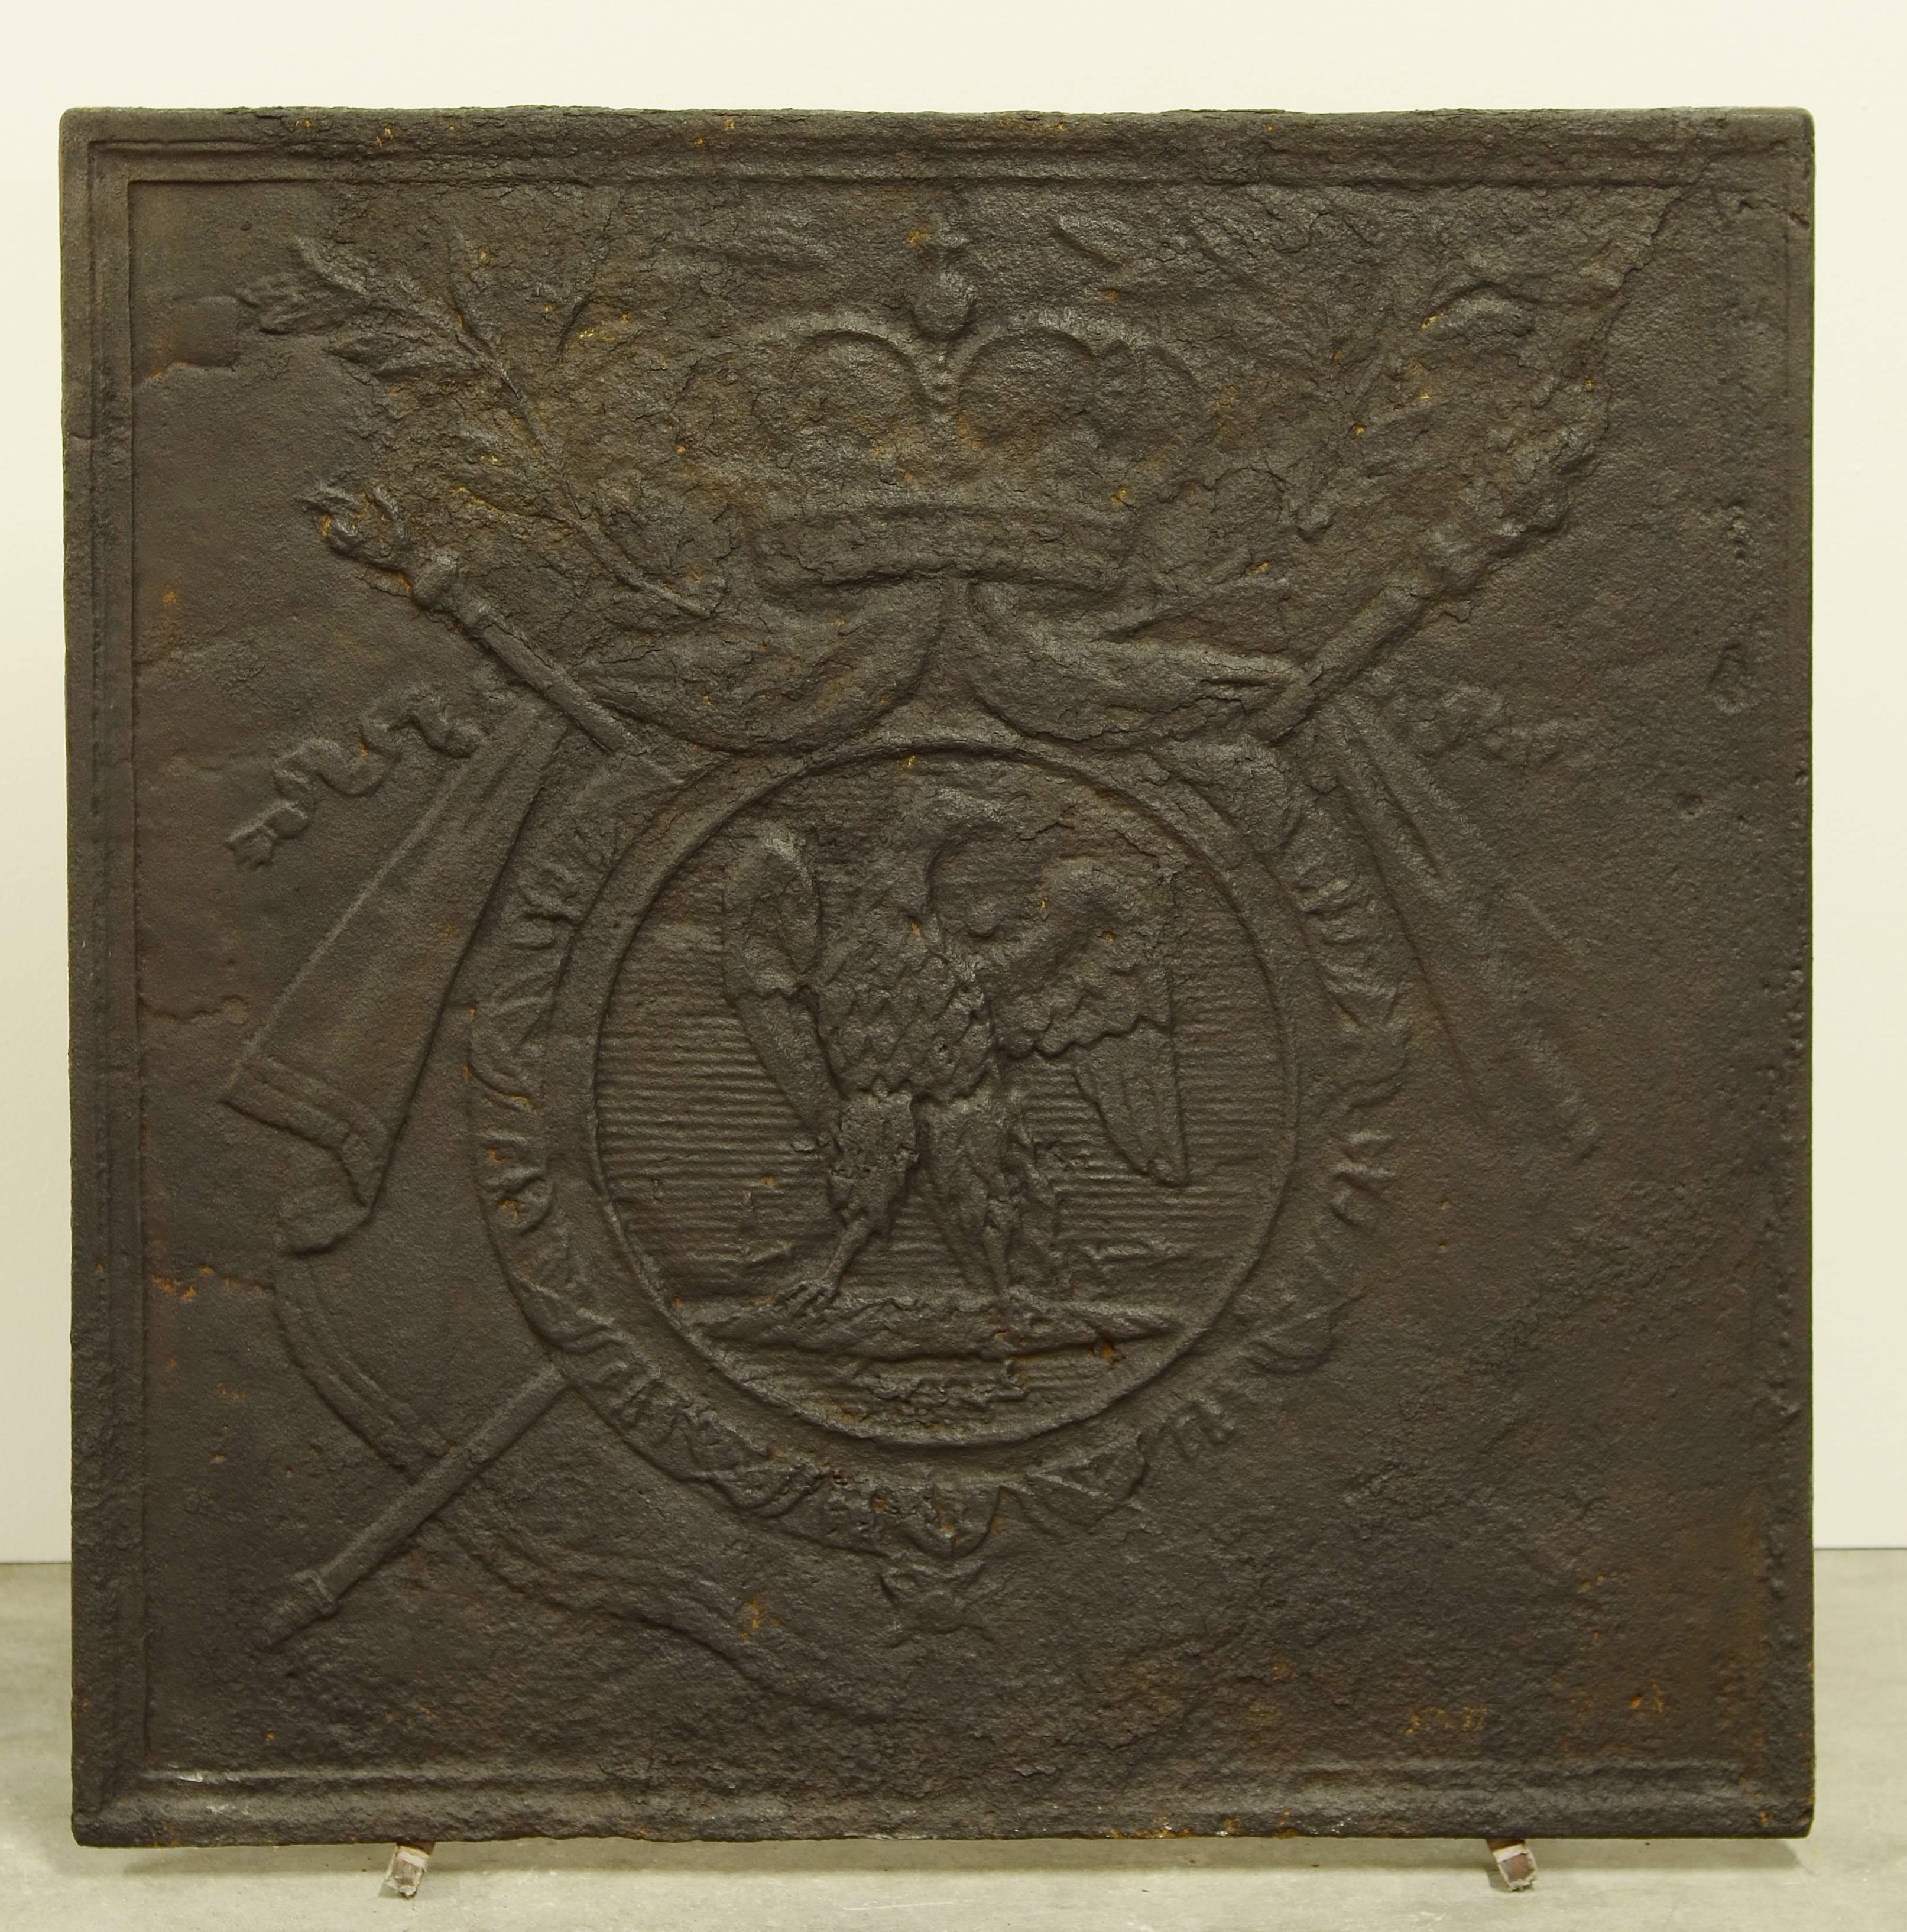 Very nice and decorative French antique cast iron fireback showing the coat of arms 